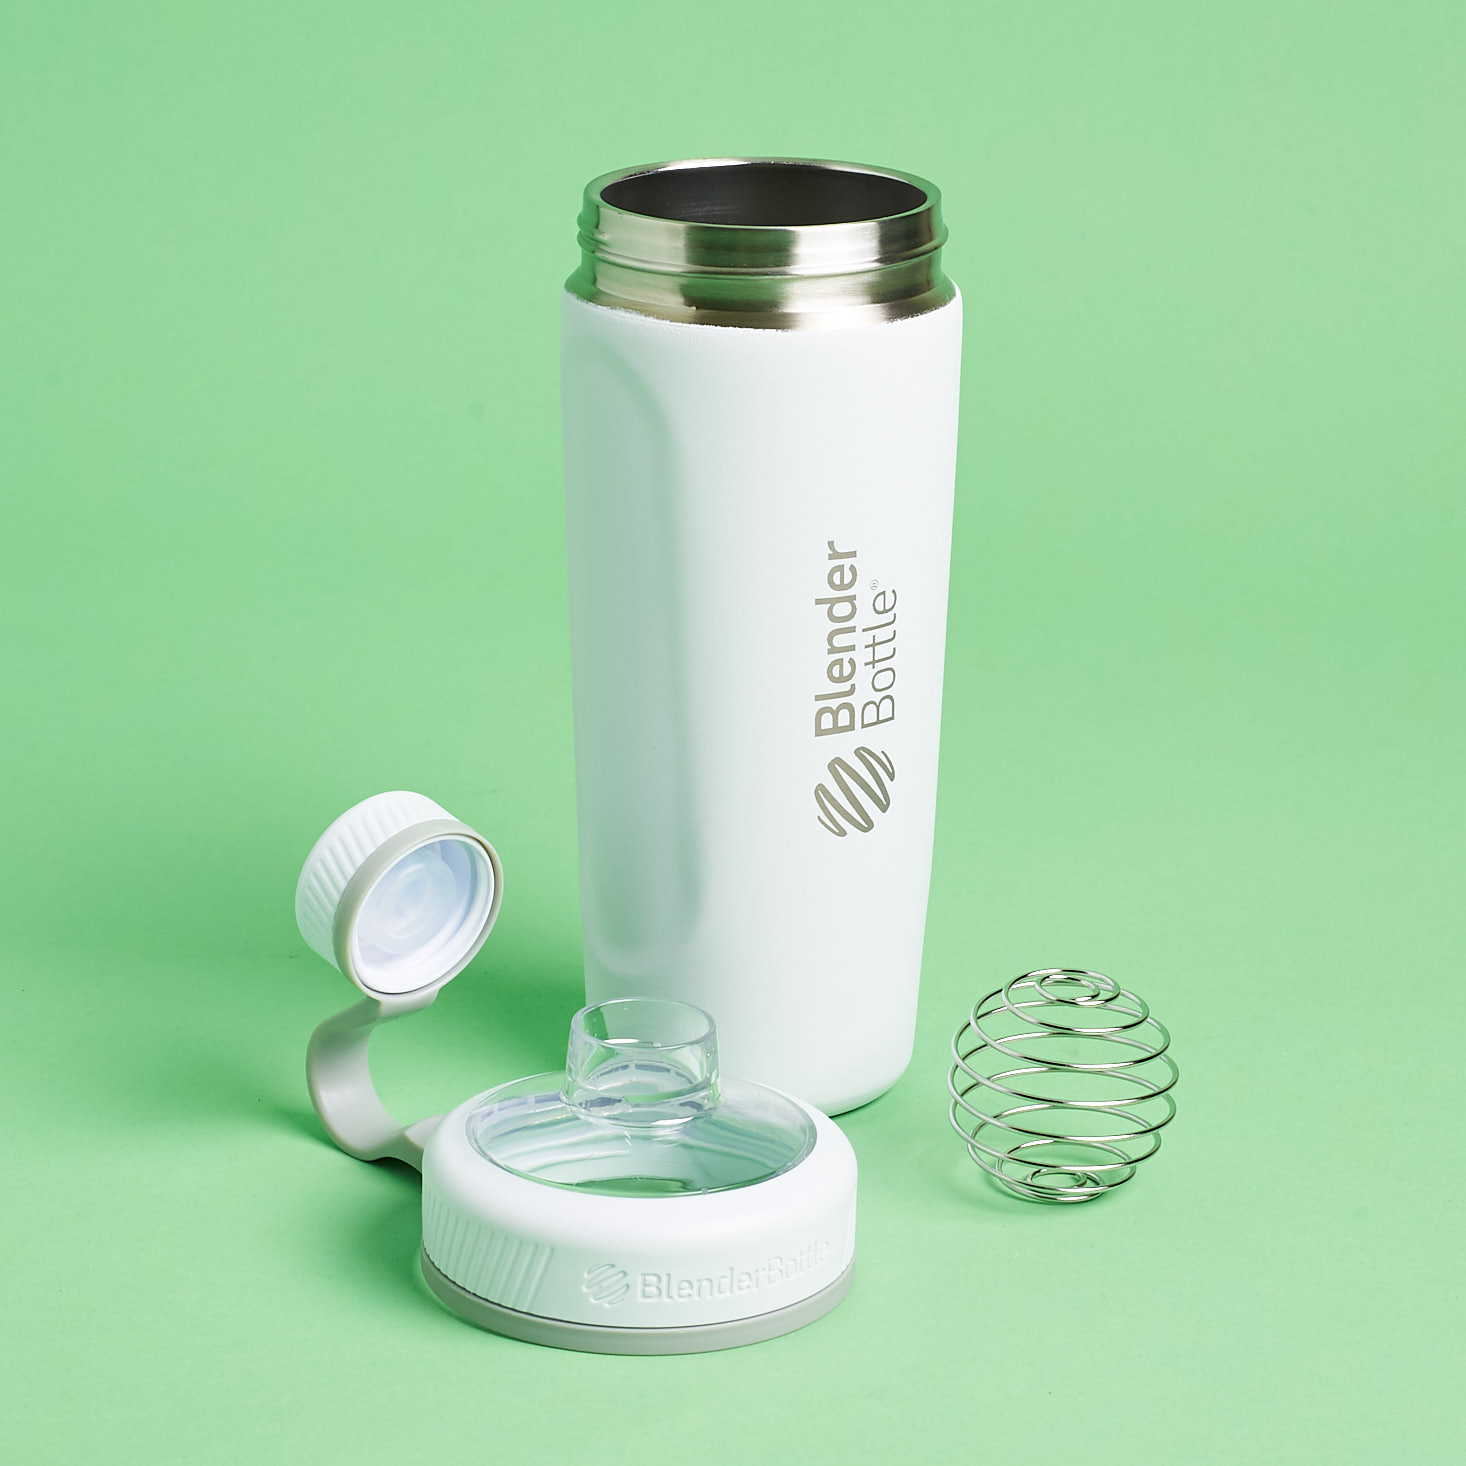 All parts of BlenderBottle Radian Insulated Stainless Steel Shaker